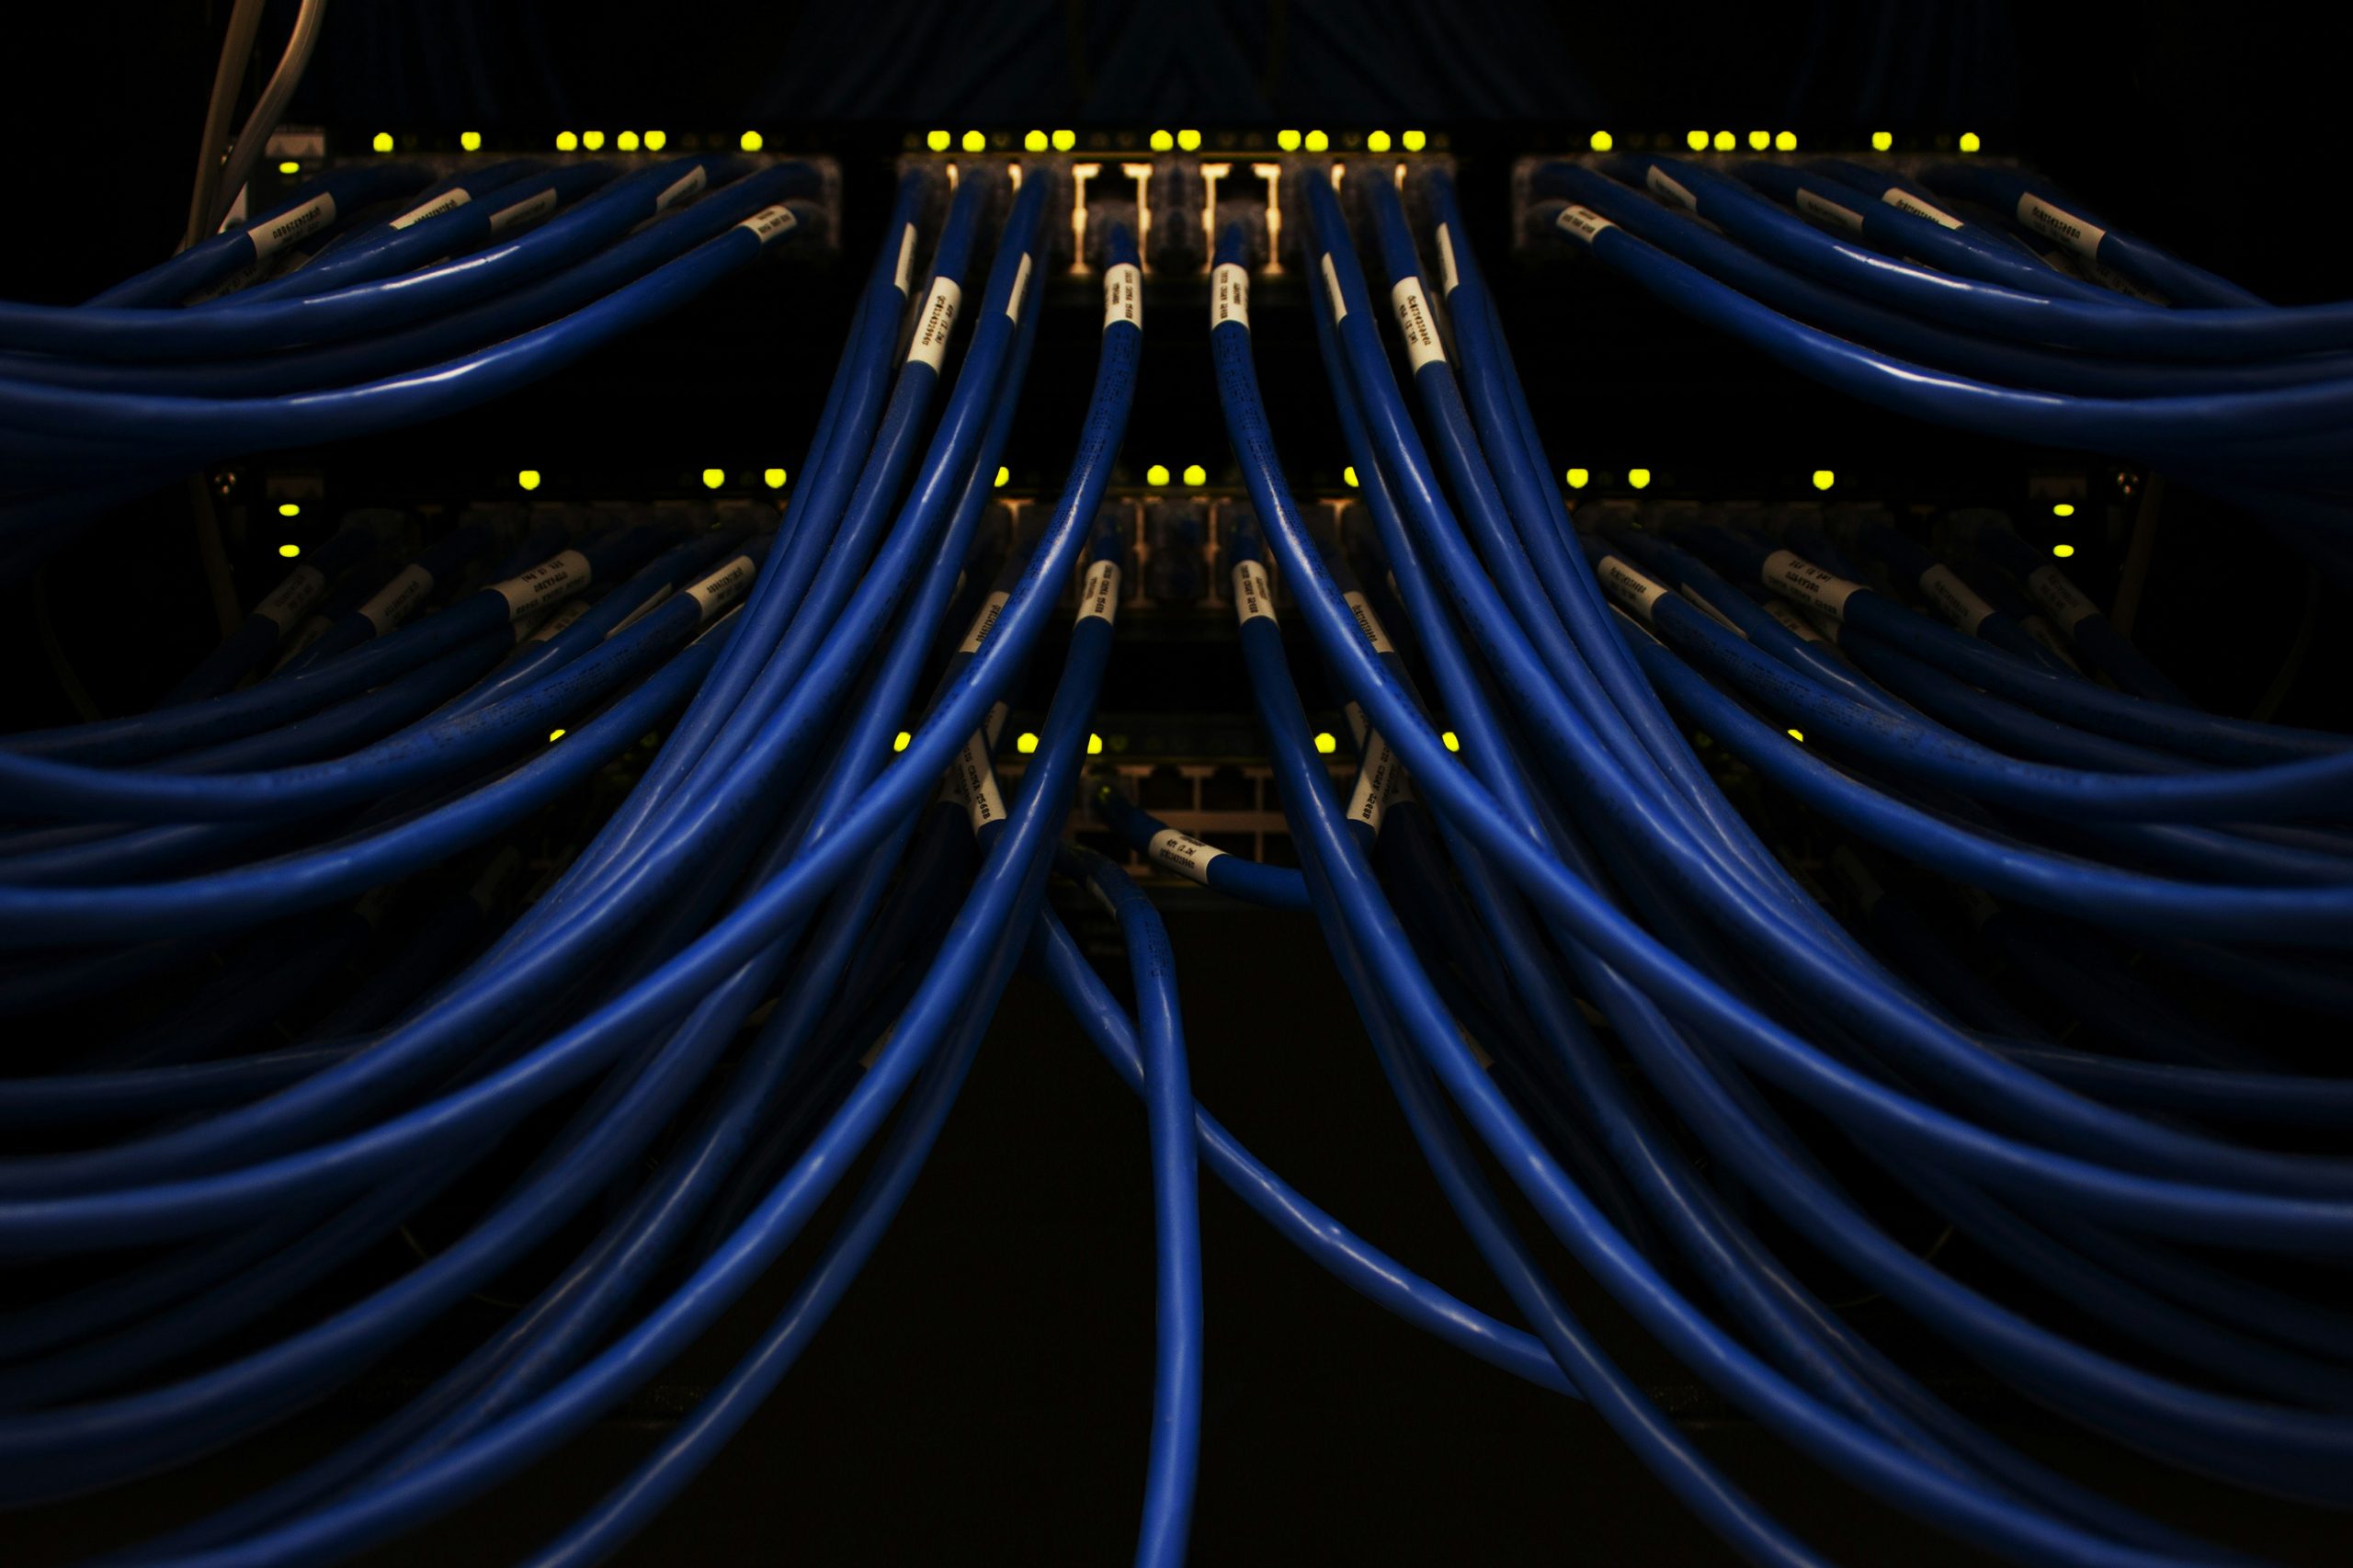 Multiple blue Ethernet cables connected to a glowing server, indicative of residential proxy servers used for web scraping.